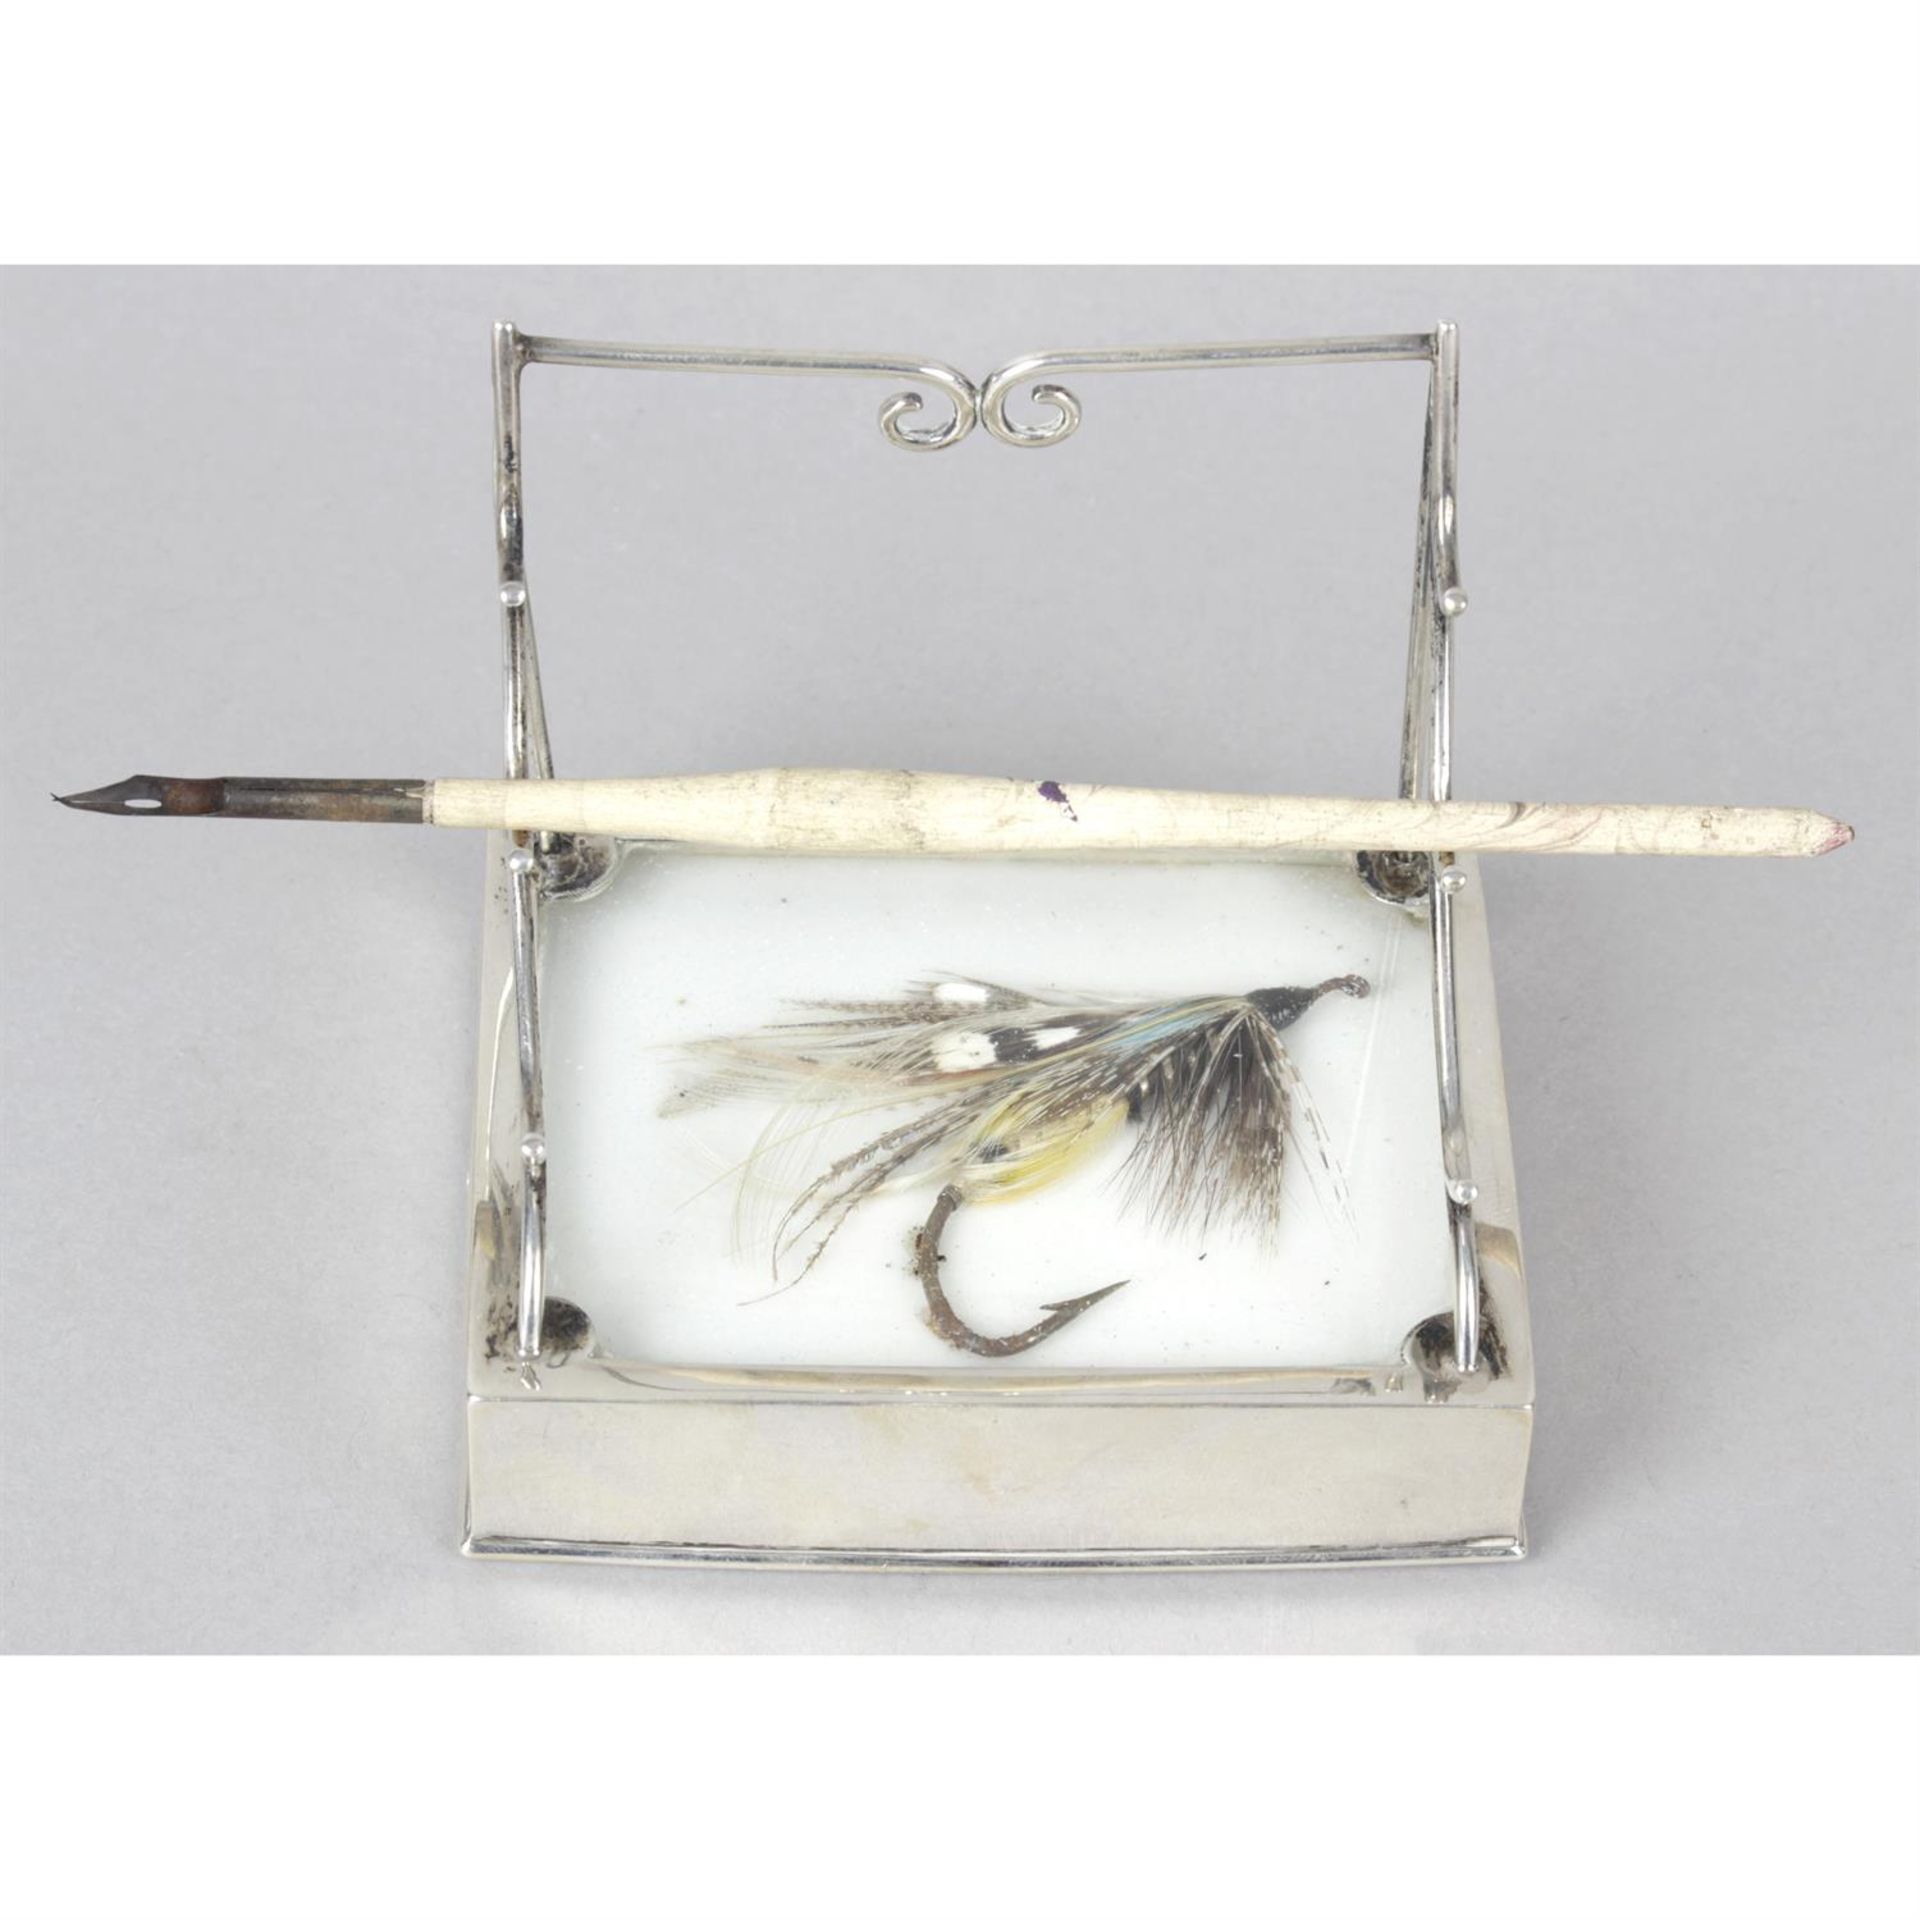 A silver combined pen stand and paperweight detailed with a fishing fly.